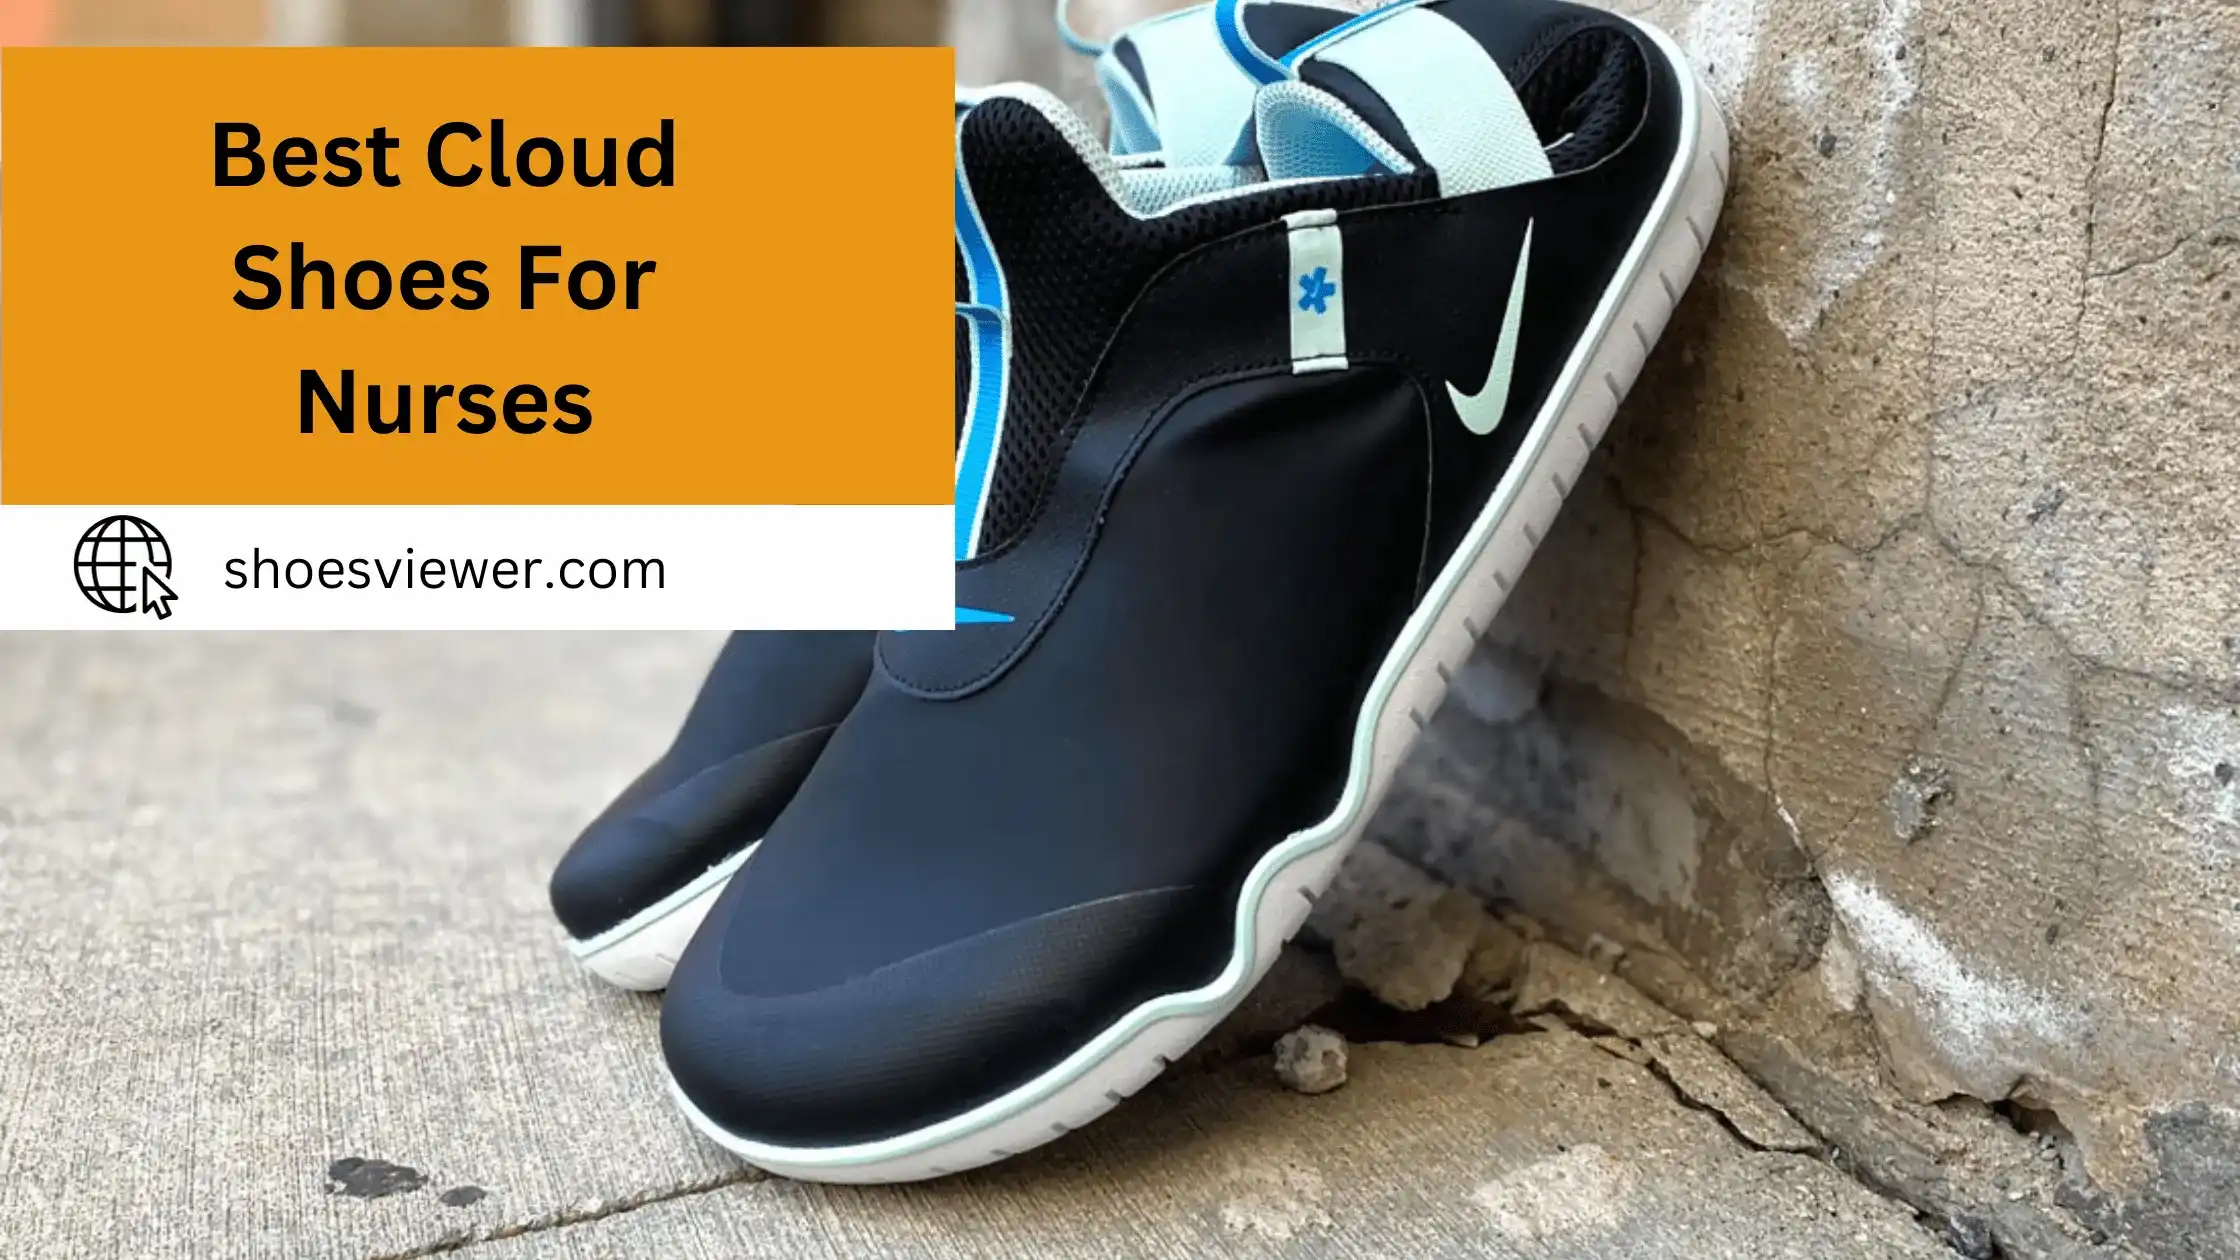 Best Cloud Shoes For Nurses - (An In-Depth Guide)